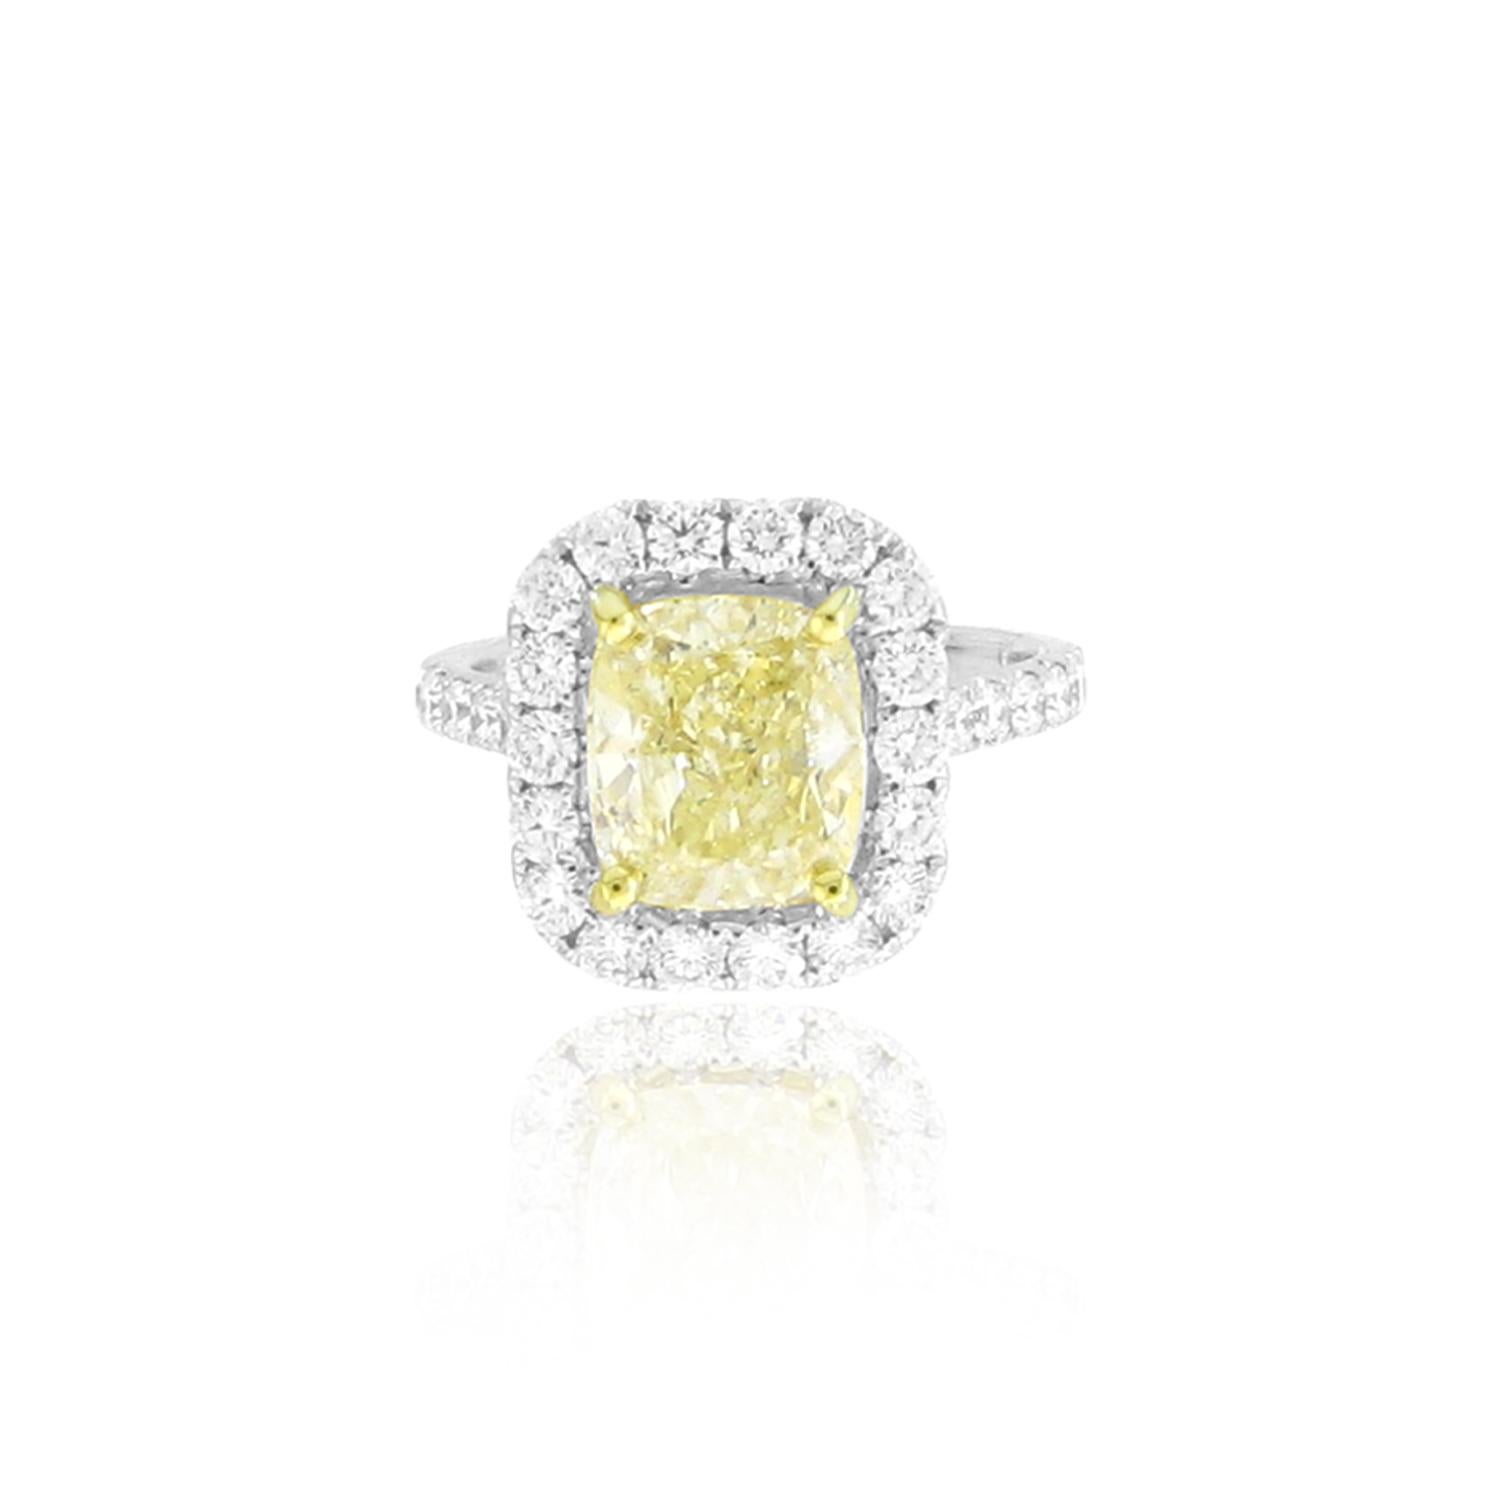 In one of BleauNY's newest collections, a lovely Fancy Yellow Diamond ring, complimented by 1.09cts of white diamonds.

Cushion Cut Yellow Diamond - 3.60ct
White Diamonds - 1.09ct
Ring Metal - 18kwg

Tag #: 17951